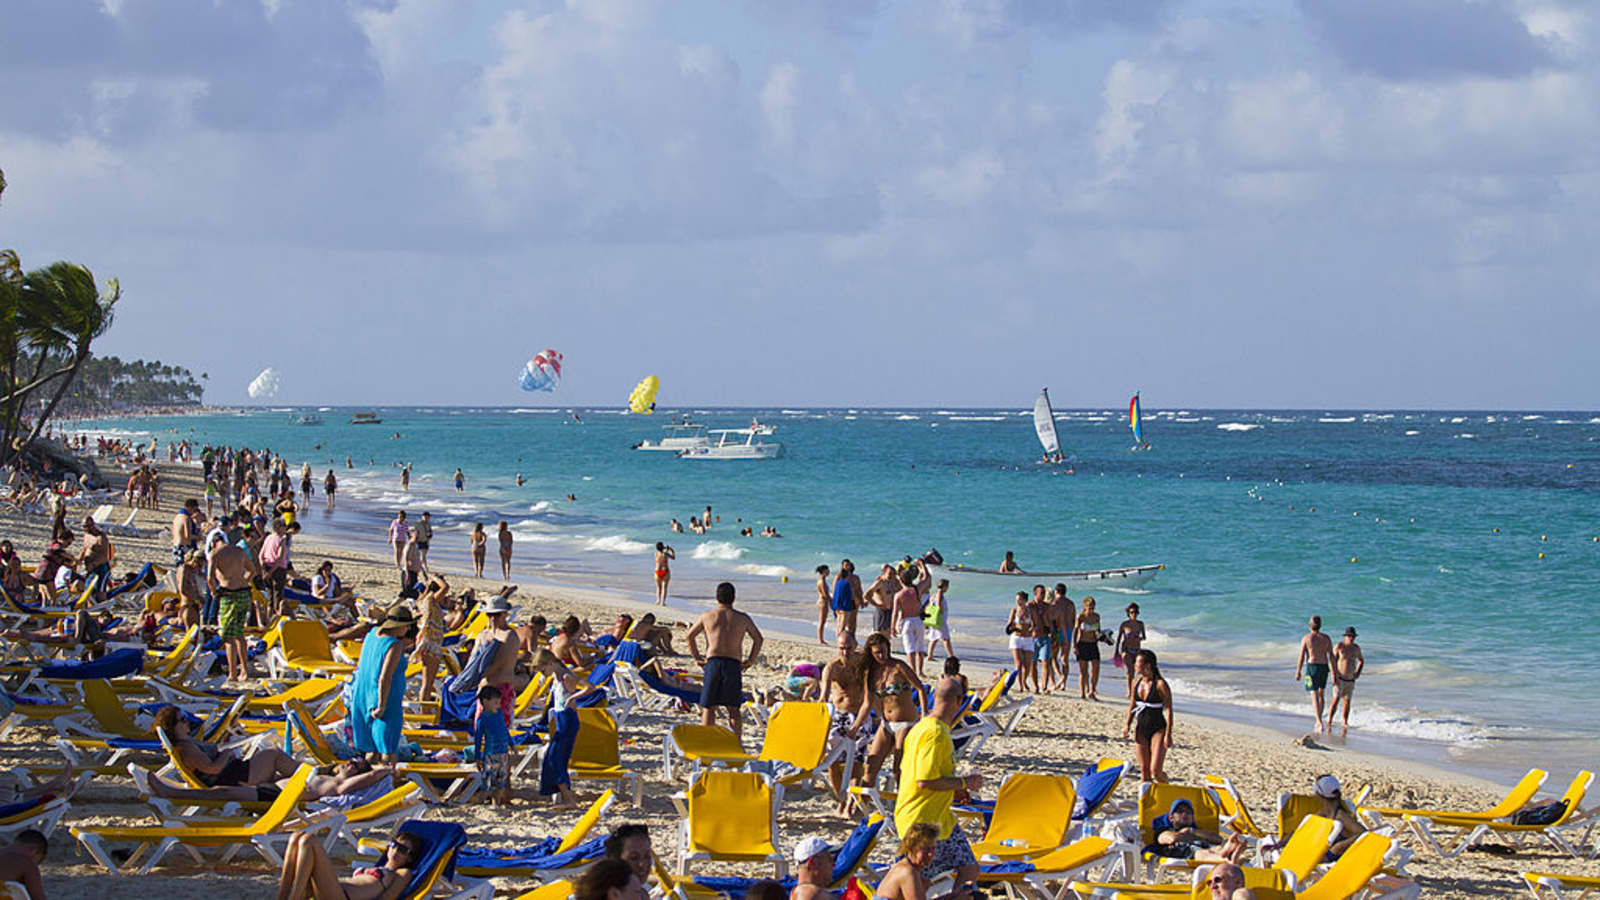 US tourists cancel trips to Dominican Republic following deaths